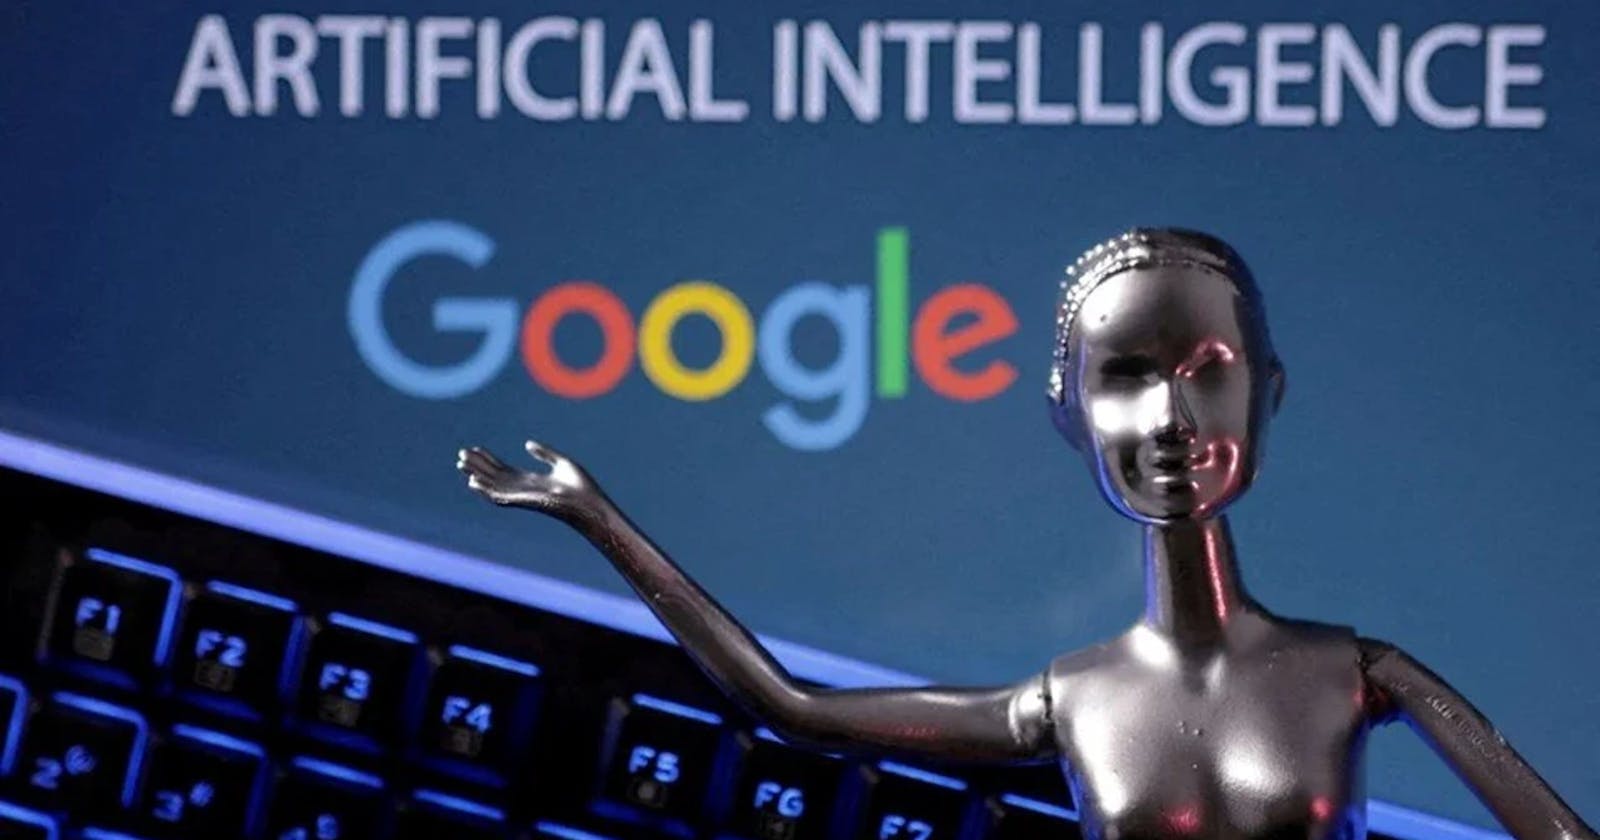 Google has launched a paid subscription for its artificial intelligence chat robot